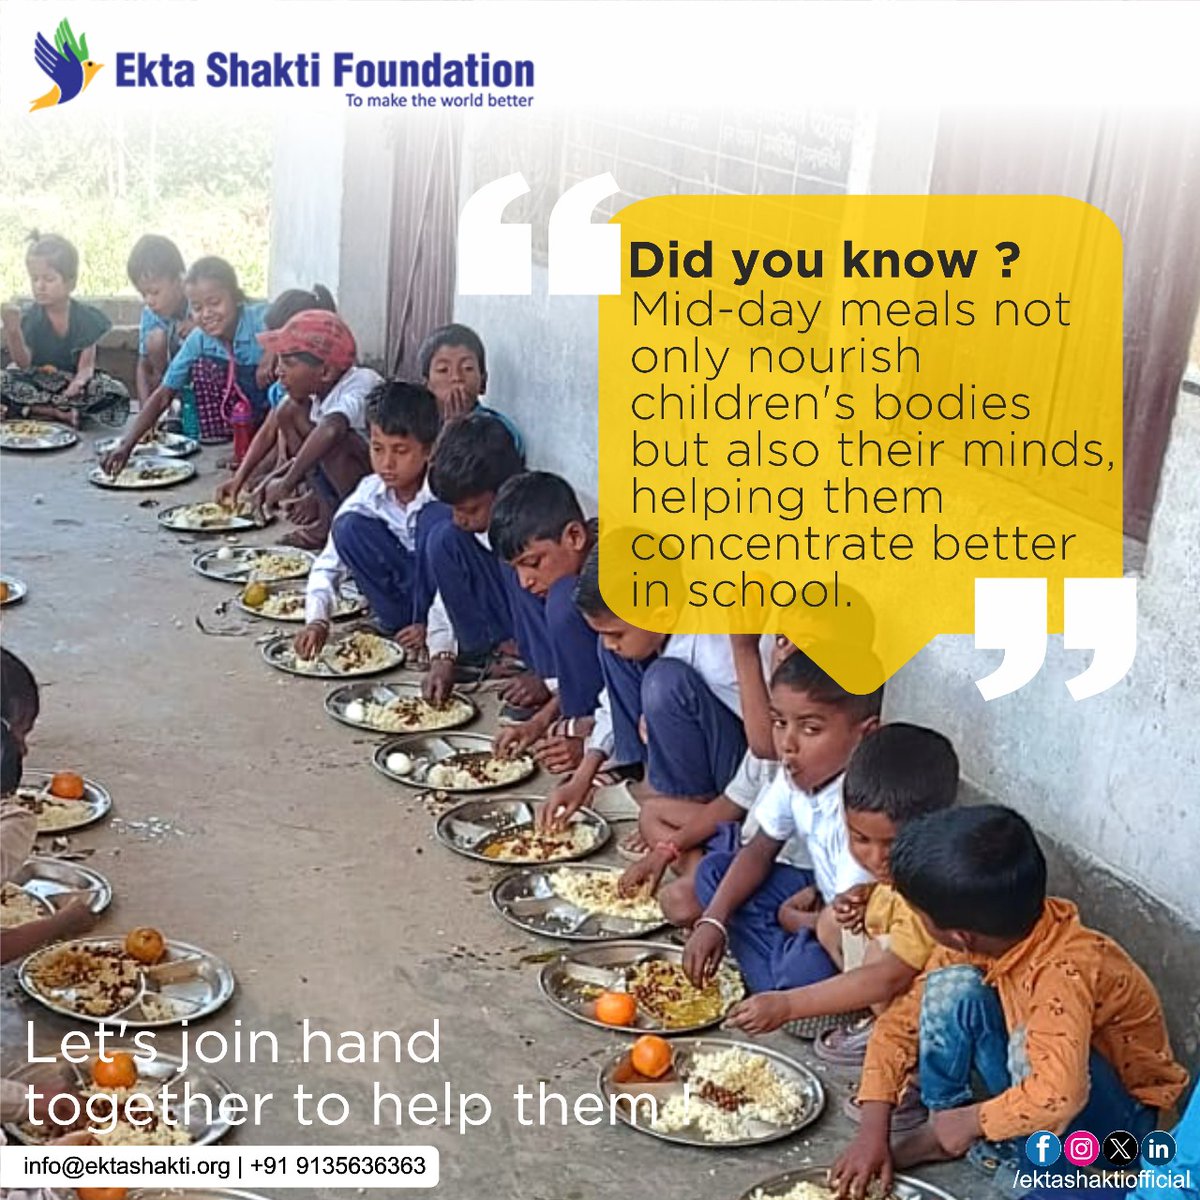 #middaymeal #nutrition #health #education